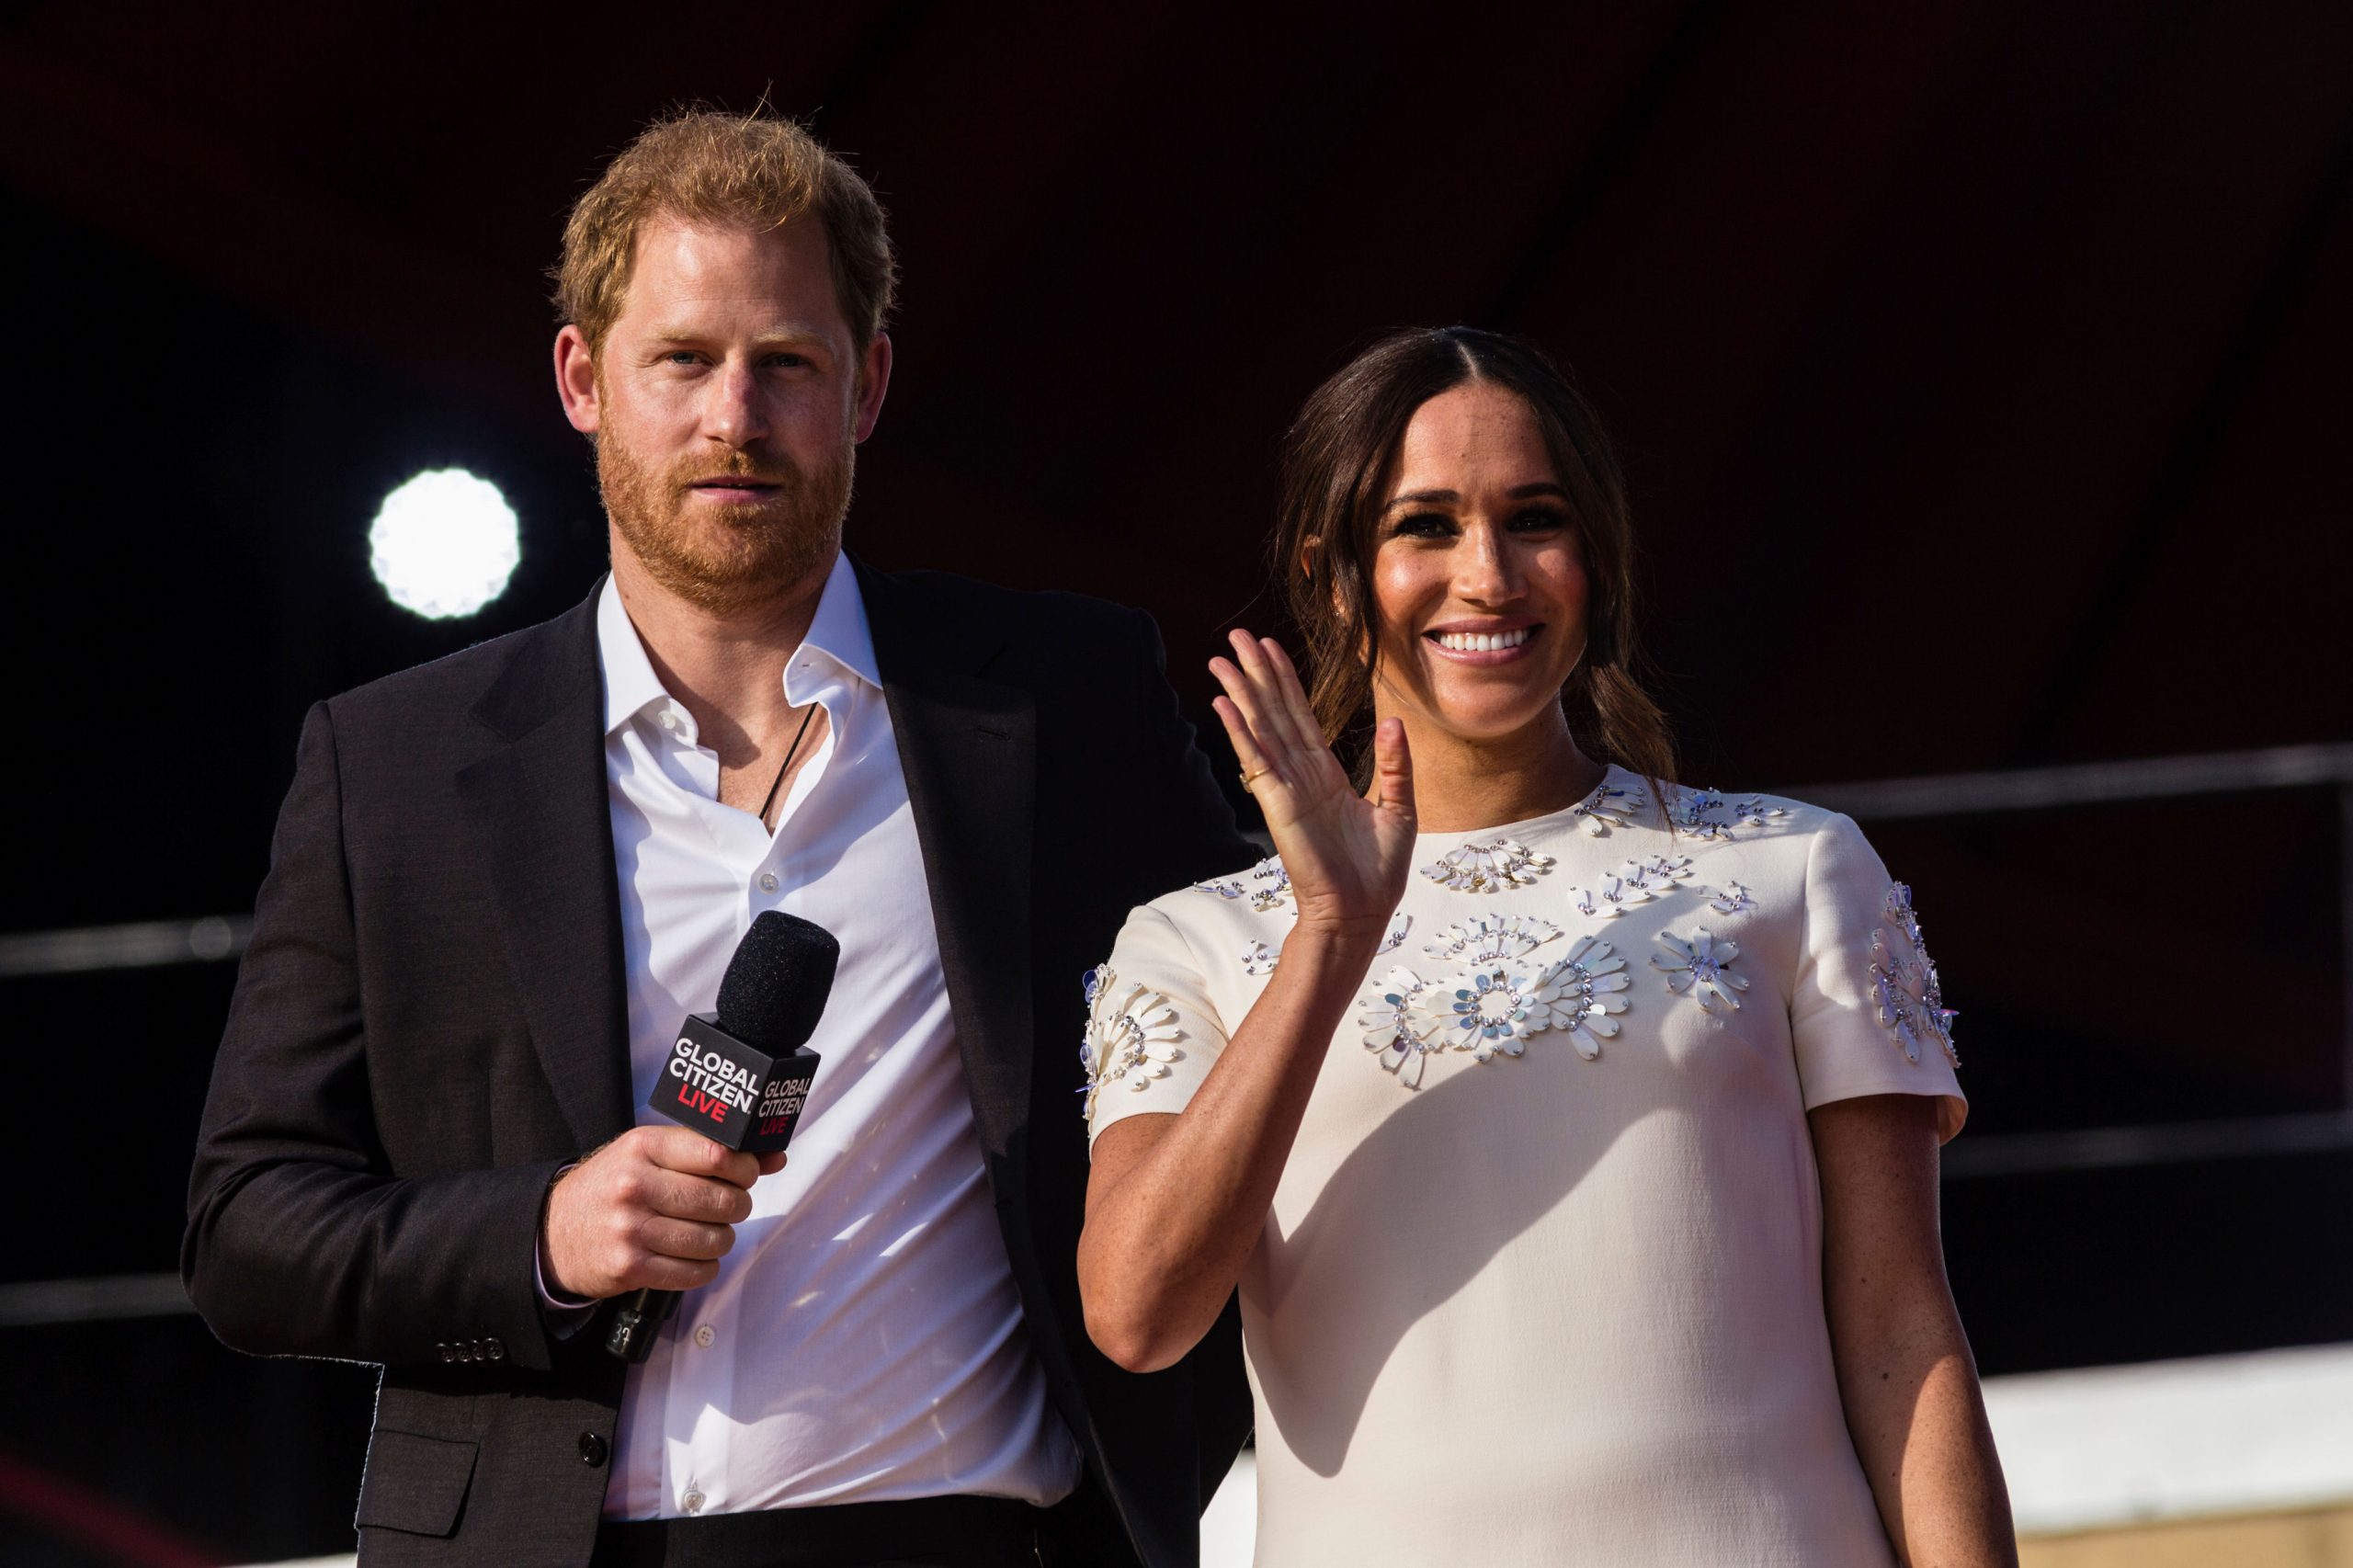 Prince Harry and Meghan Markle to make surprise visit to UK in September